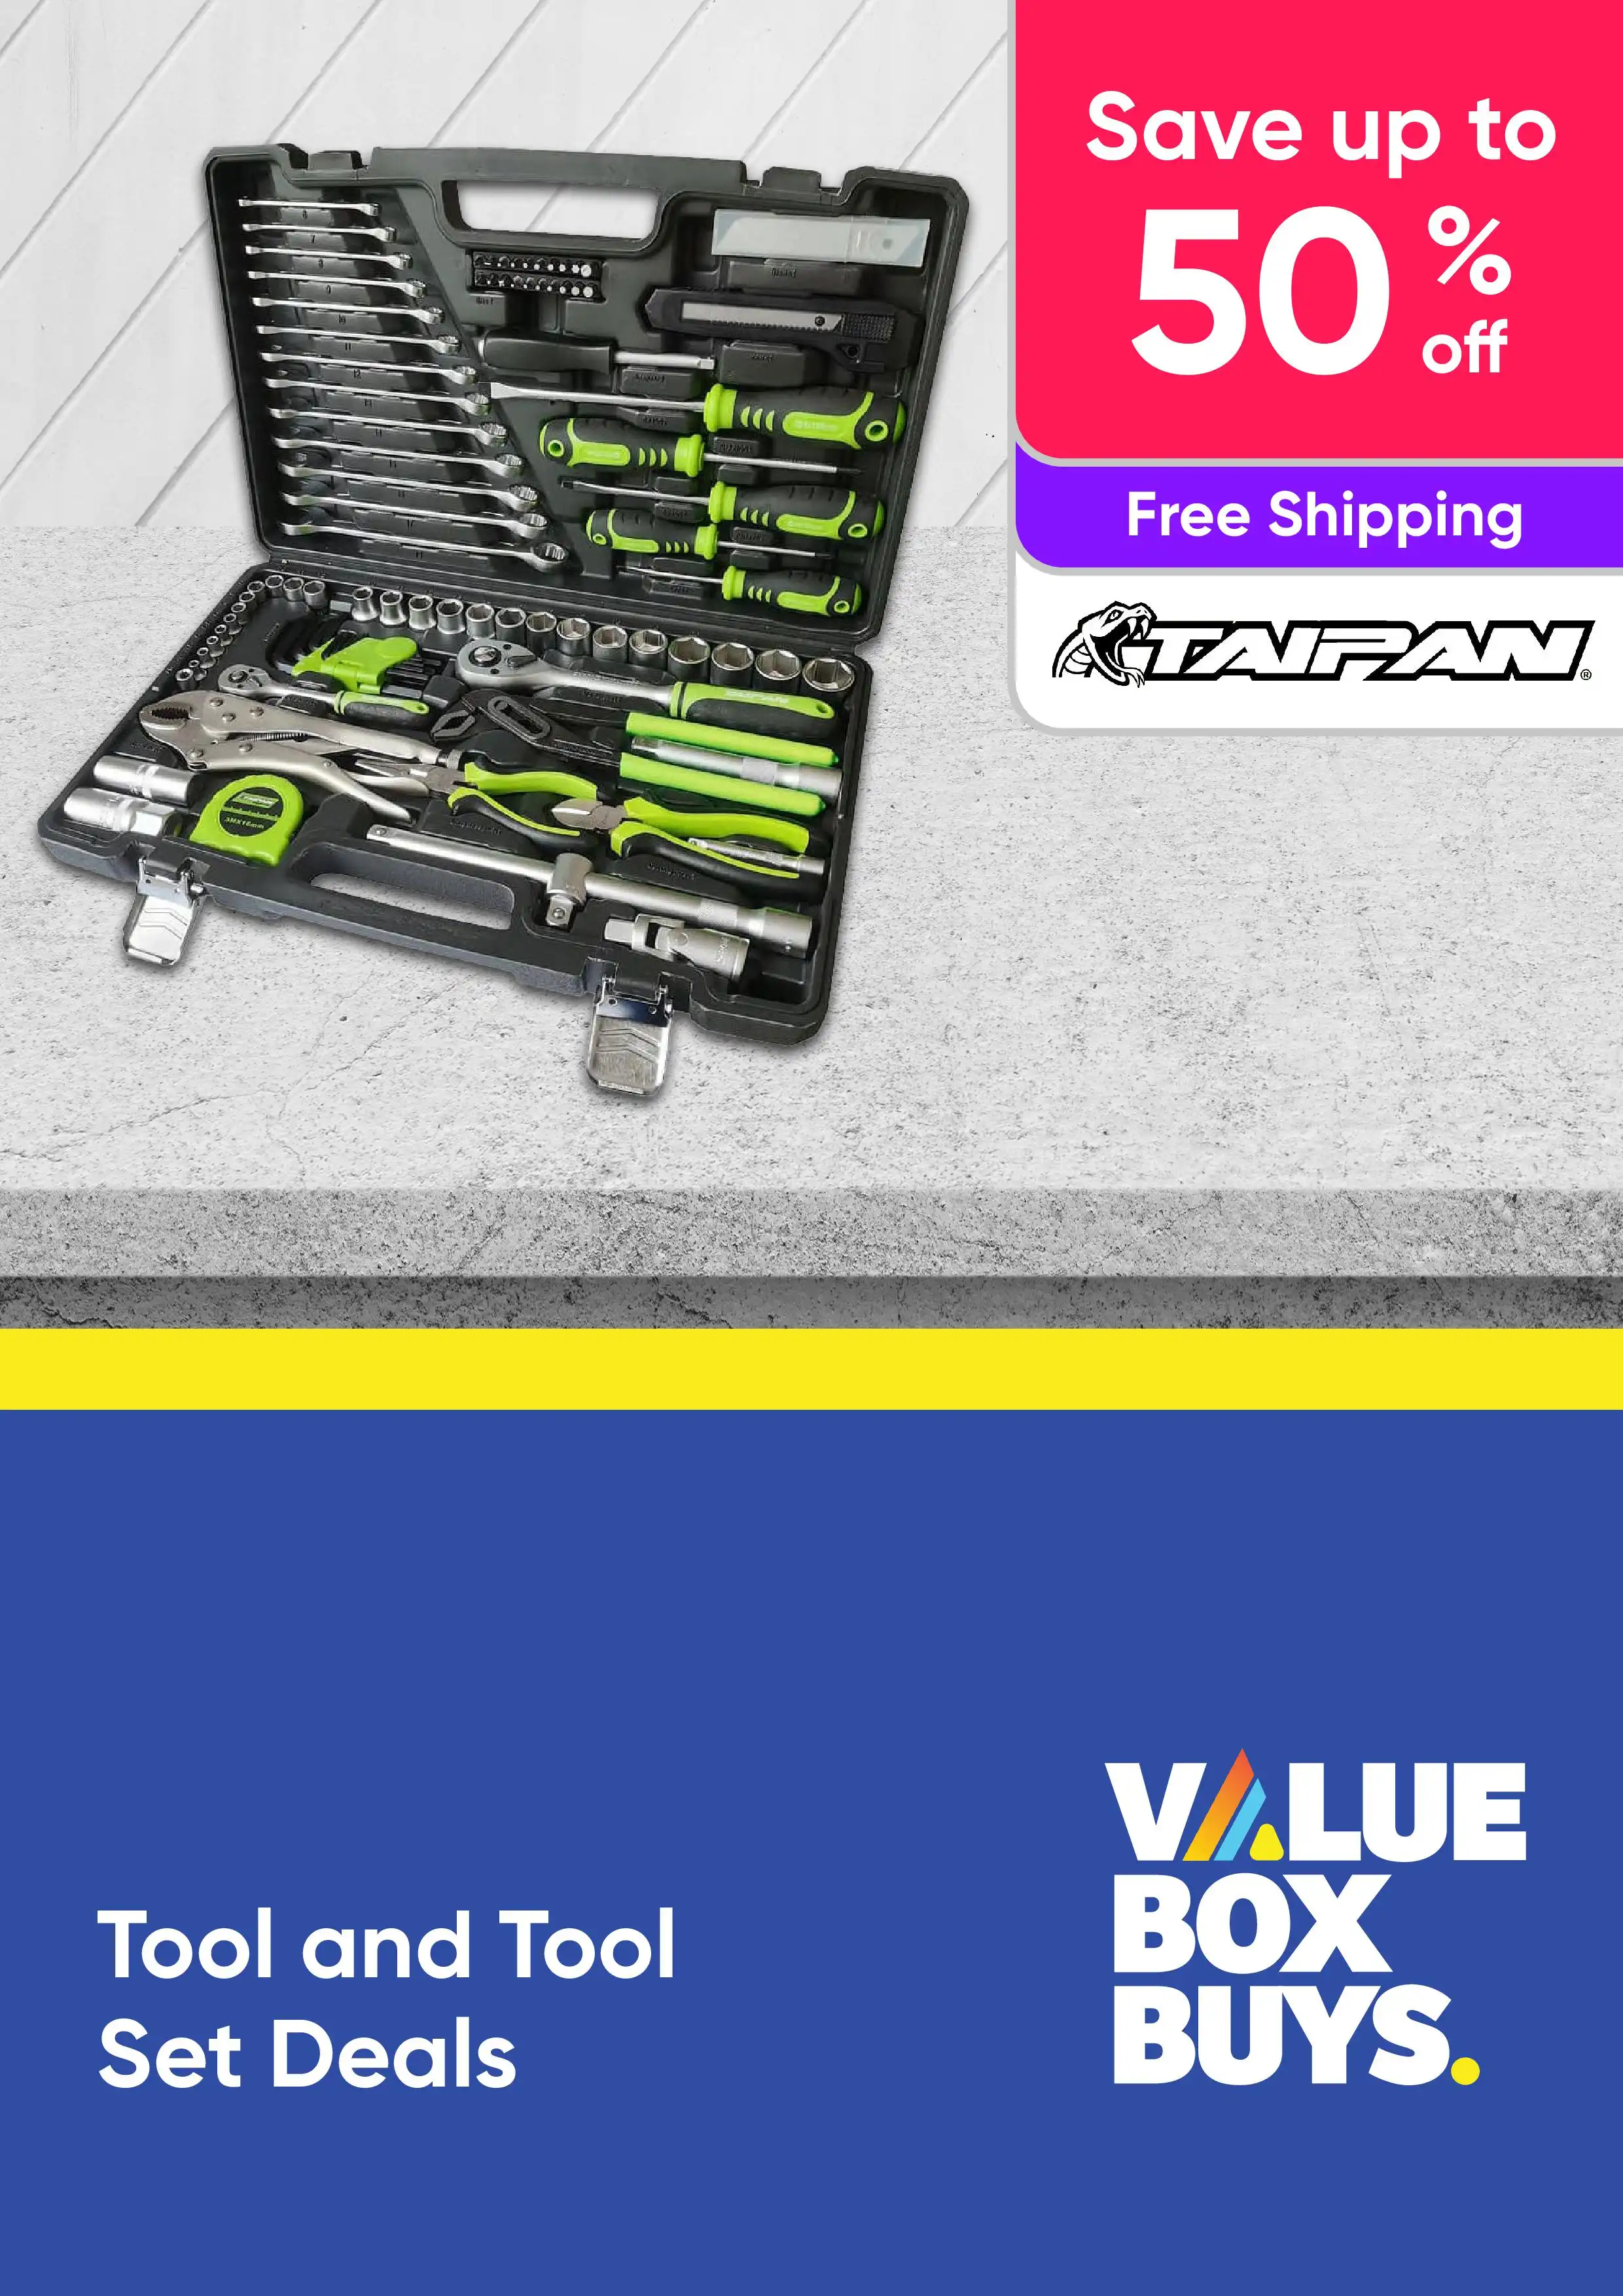 Taipan Tool and Tool Set Deals - Up to 50% off